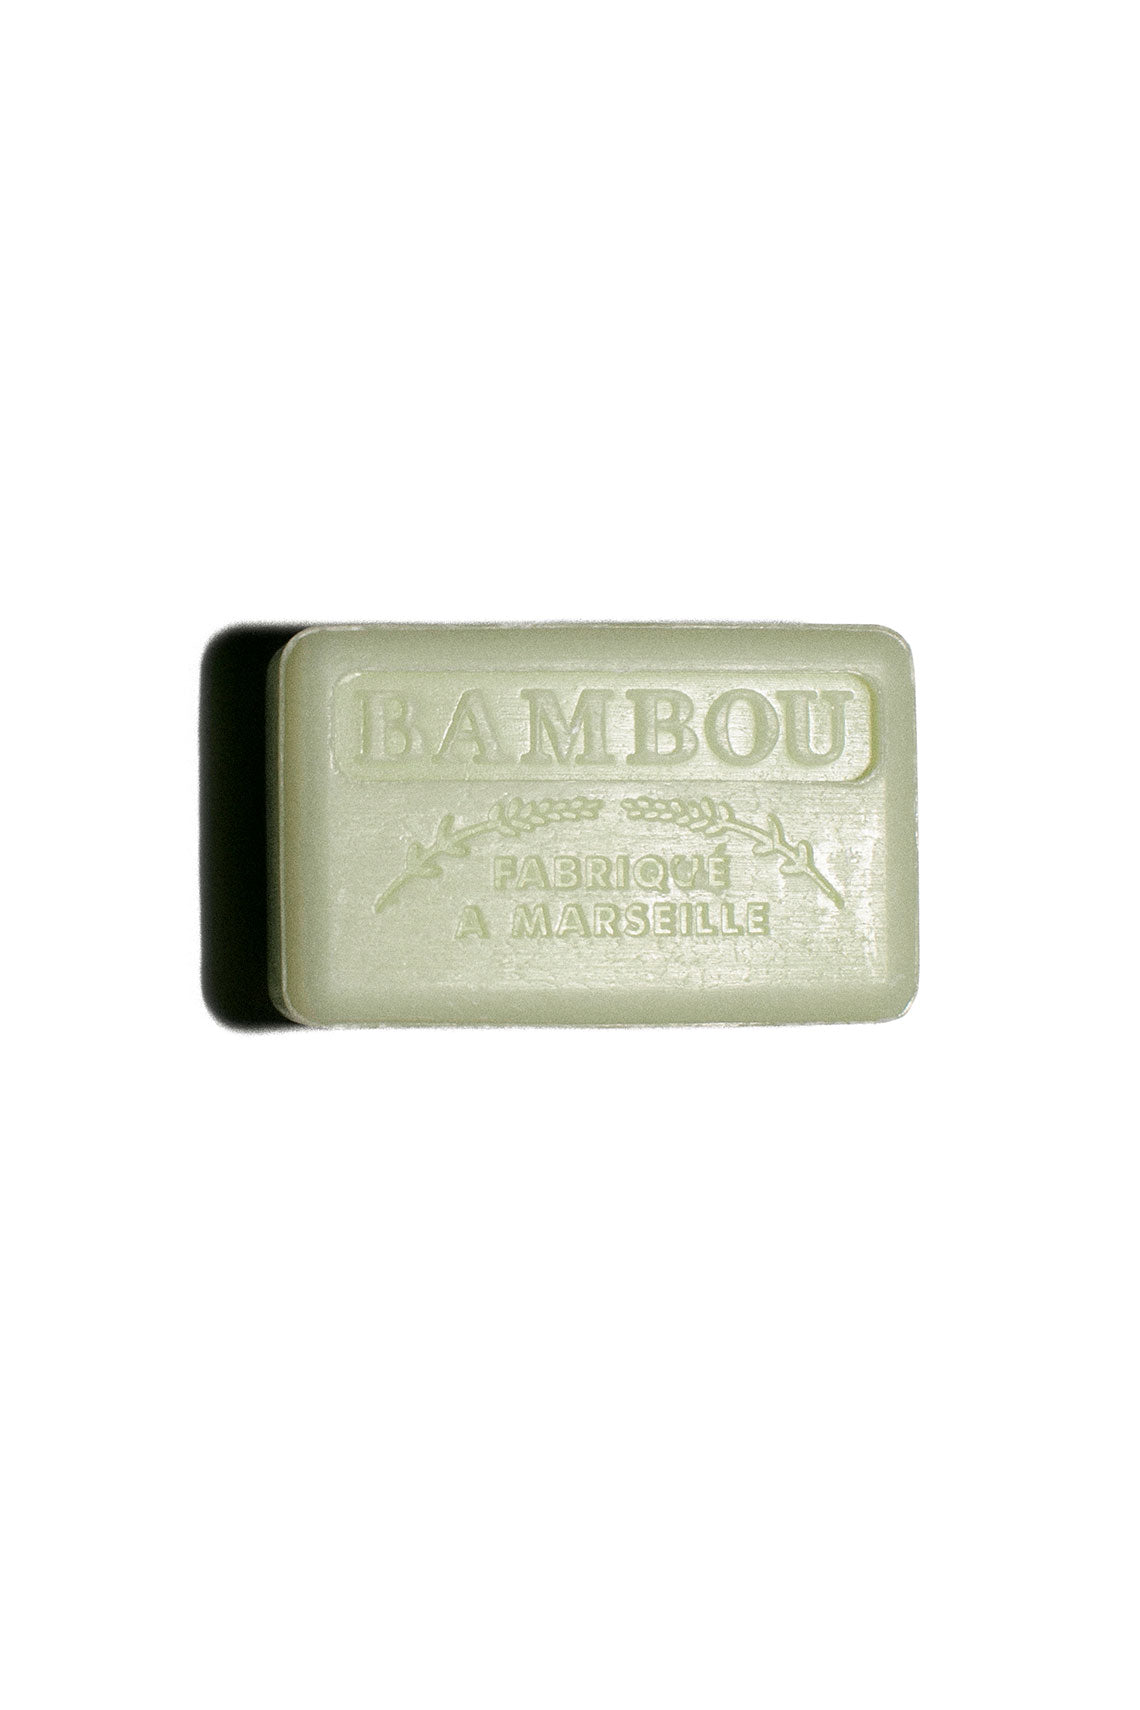 Marseille Bamboo Organic Soap with Shea Butter